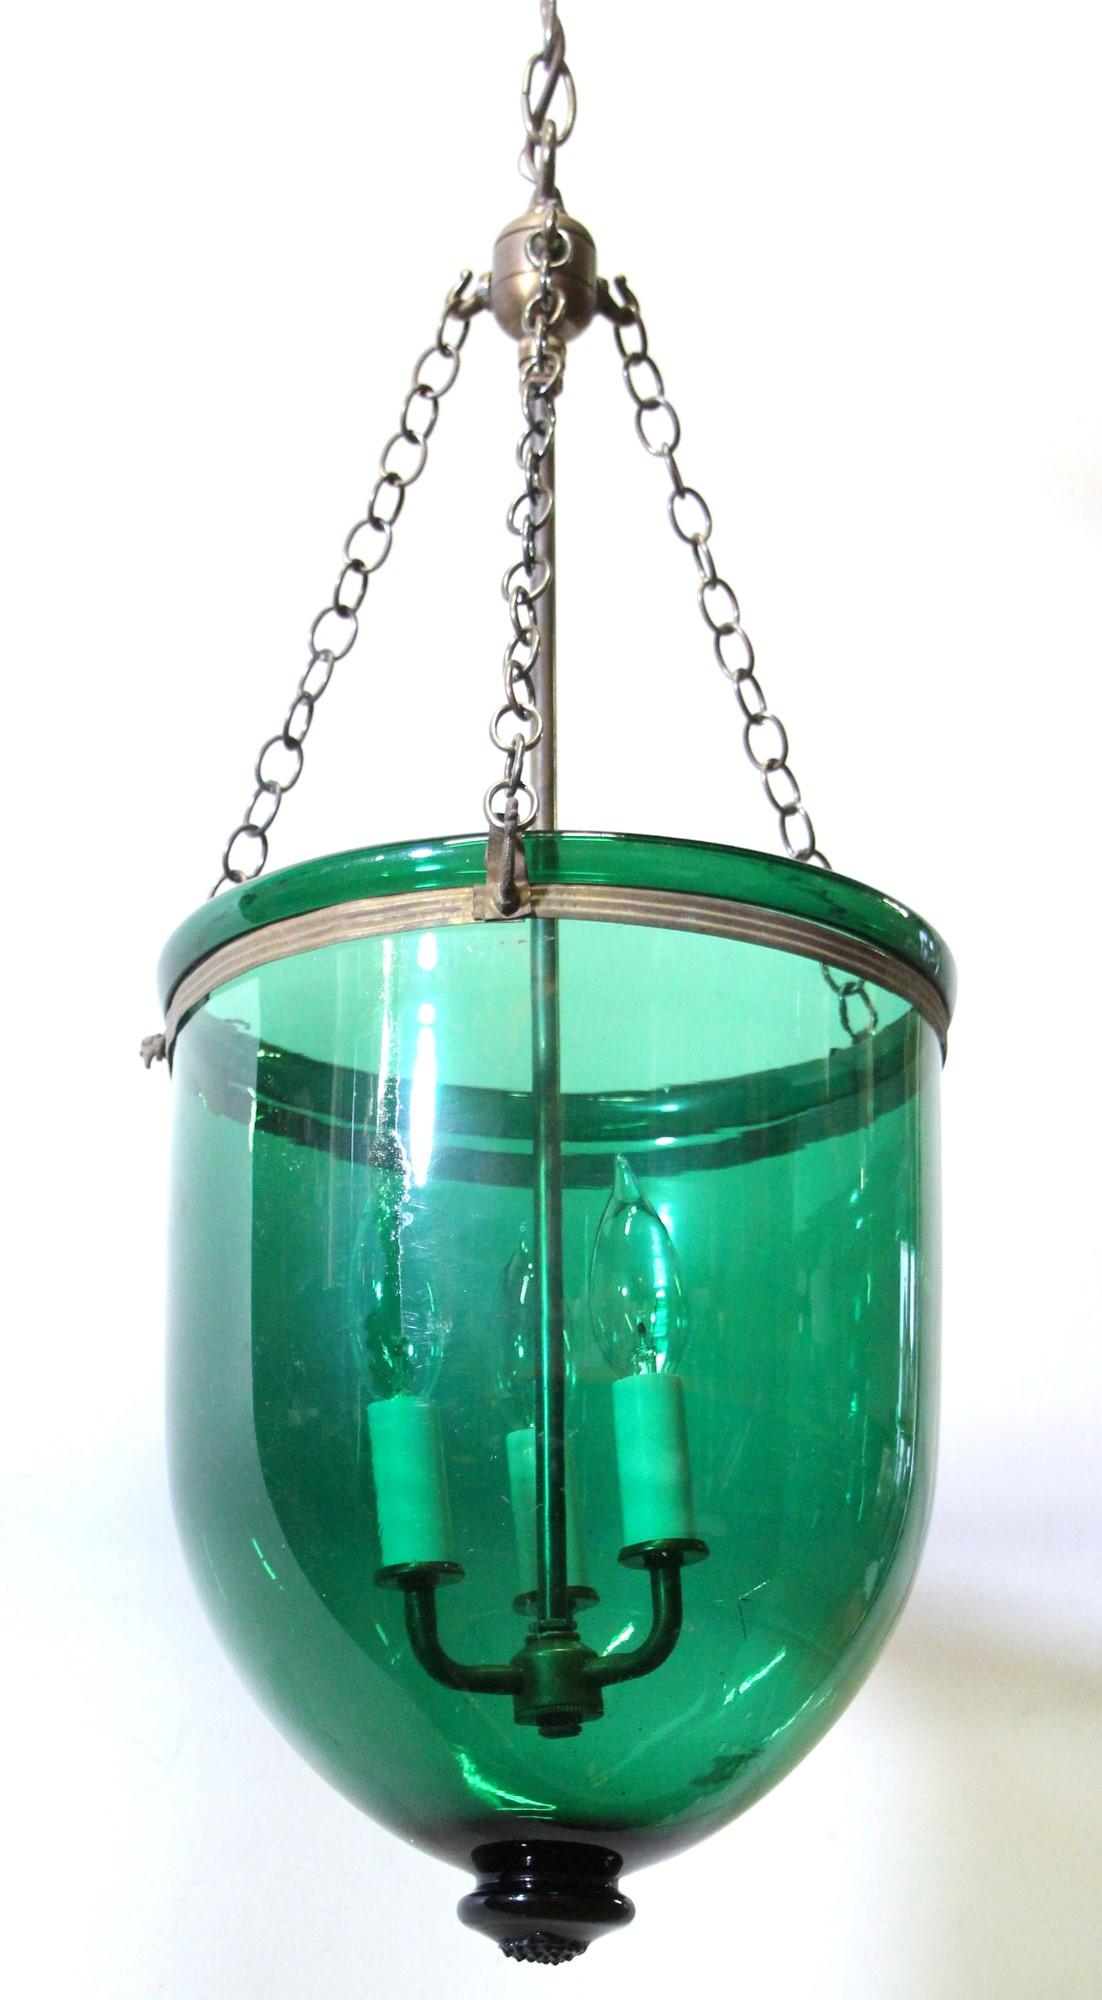 Antique crystal bell jar pendant light with a deep green hue and brass hardware. The brass hardware includes the chain, canopy, rod, and finial which supports the hand-blown glass jar and 3-lights. Price includes the cleaning, and wiring. 

